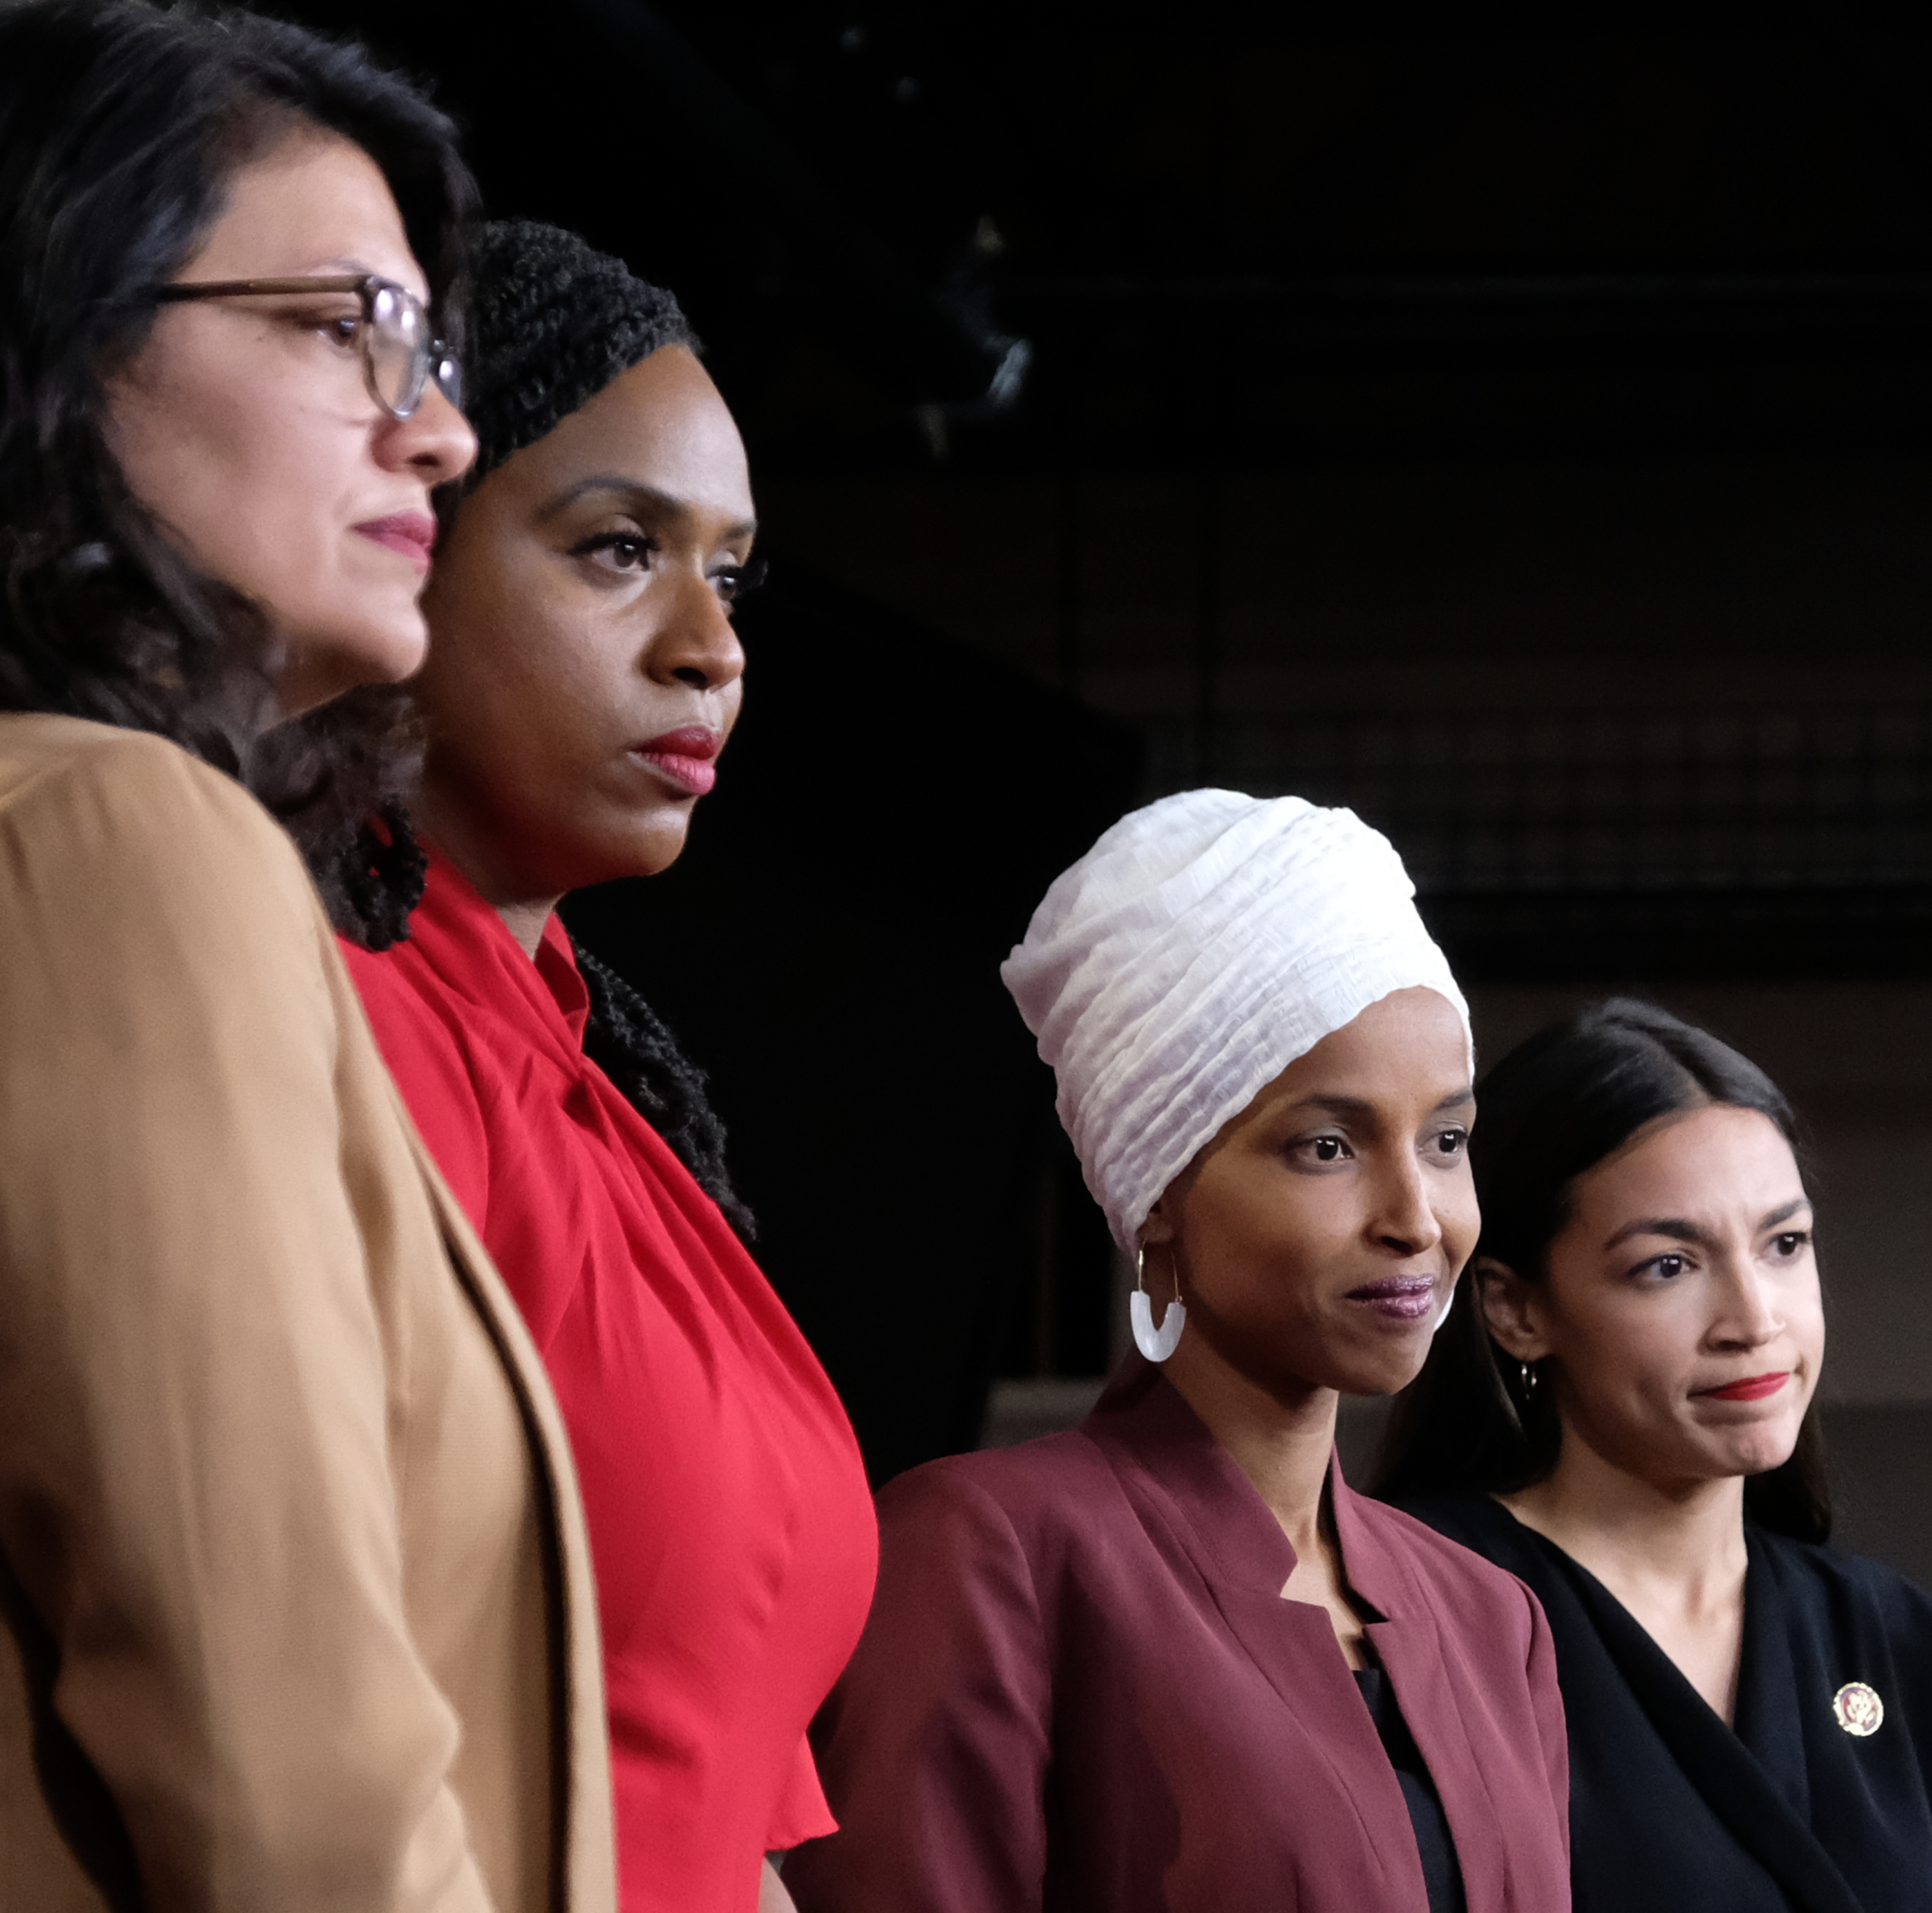 U.S. Rep. Rashida Tlaib (D-MI), Rep. Ayanna Pressley (D-MA), Rep. Ilhan Omar (D-MN), and Rep. Alexandria Ocasio-Cortez (D-NY) pause between answering questions during a press conference at the U.S. Capitol on July 15, 2019 in Washington, DC.